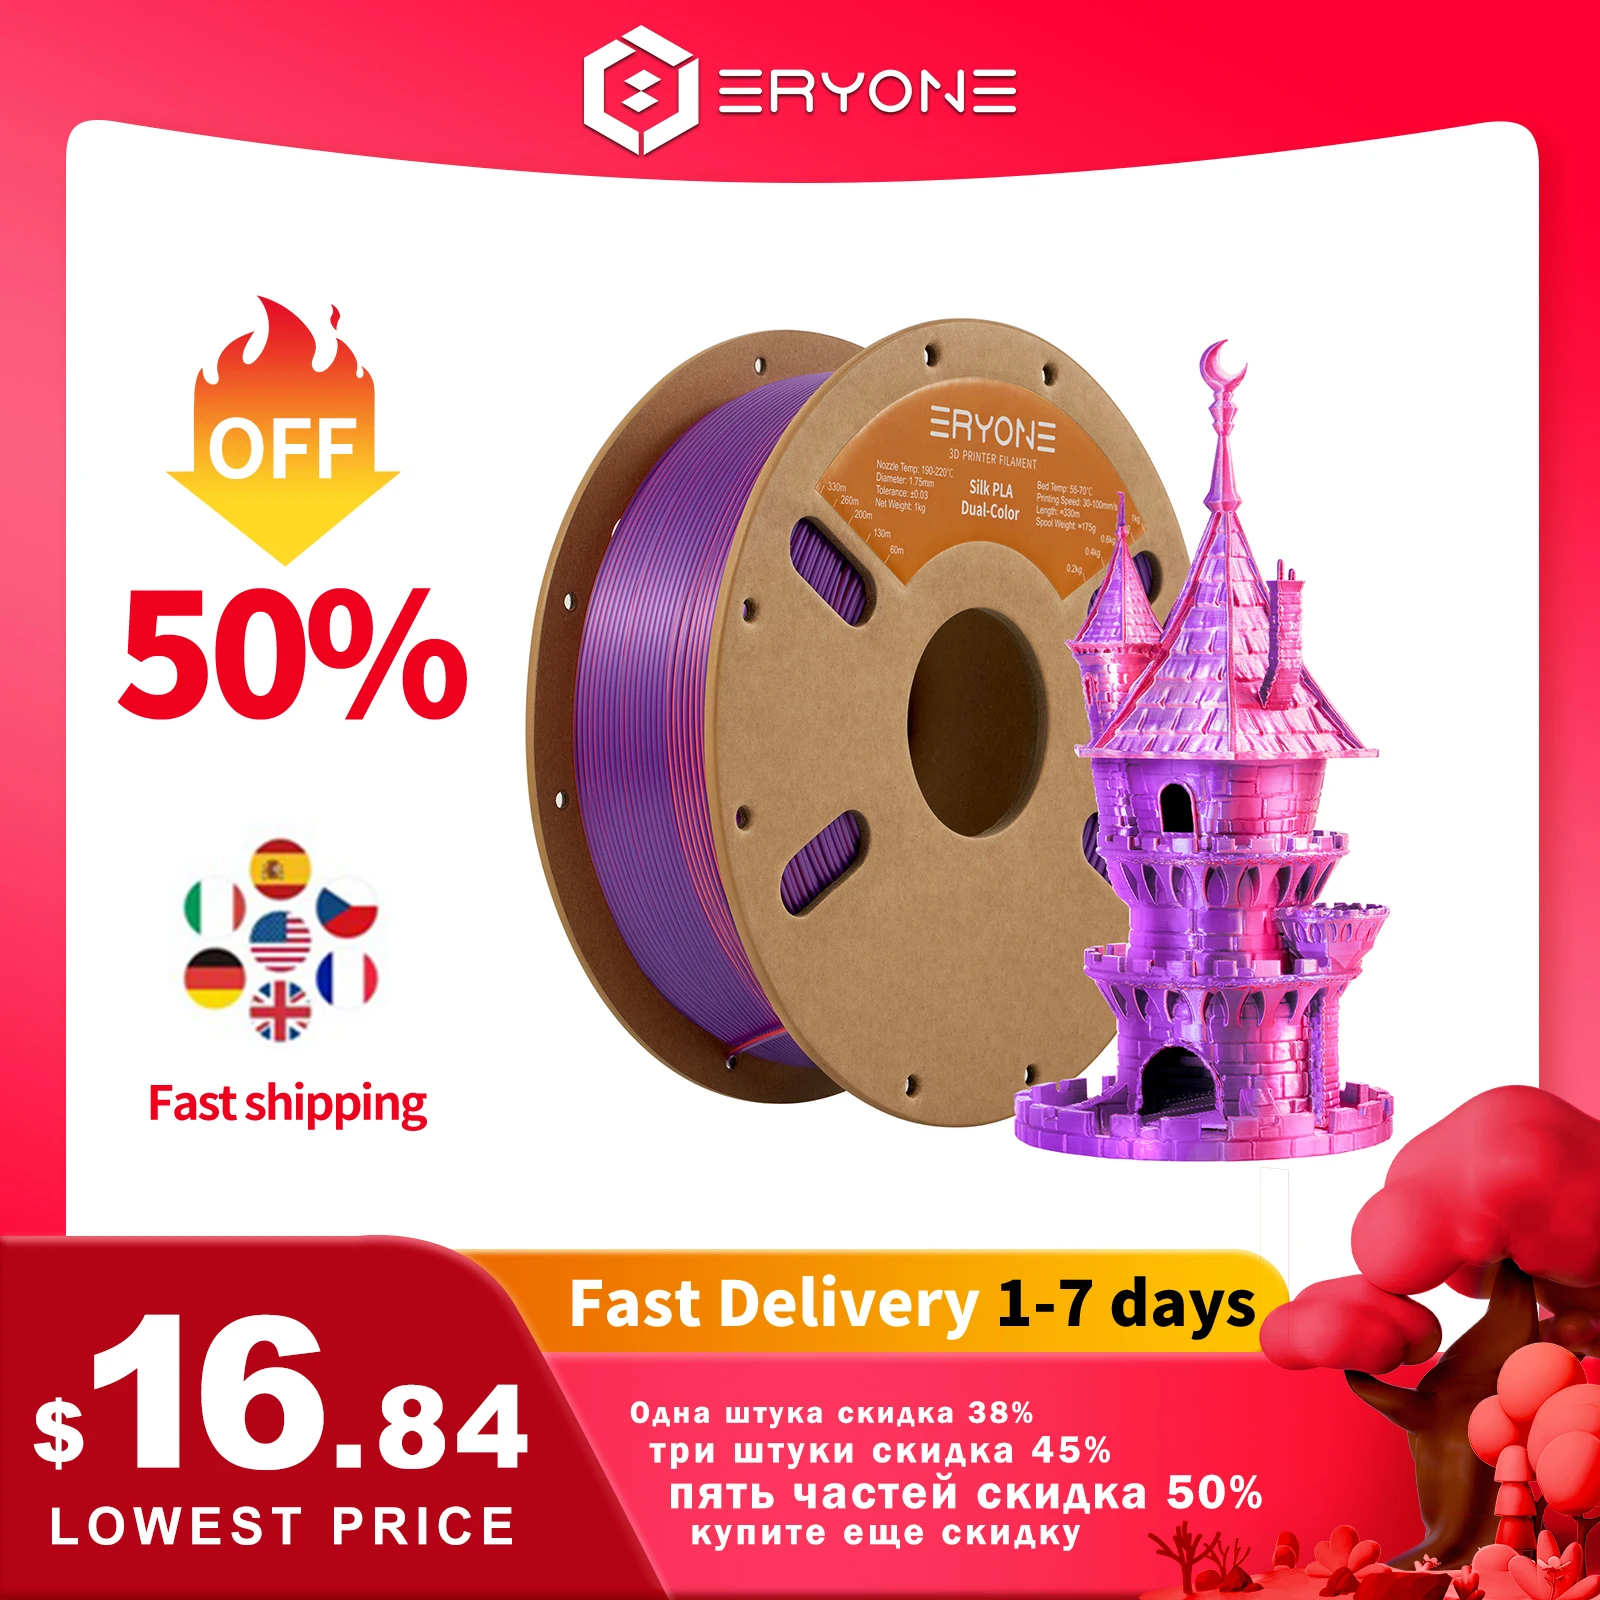 

ERYONE New Arrival Dual Color Silk PLA High Quality Filament 1KG 1.75mm Diameter For 3D Printing FDM Printer Fast Free Shipping